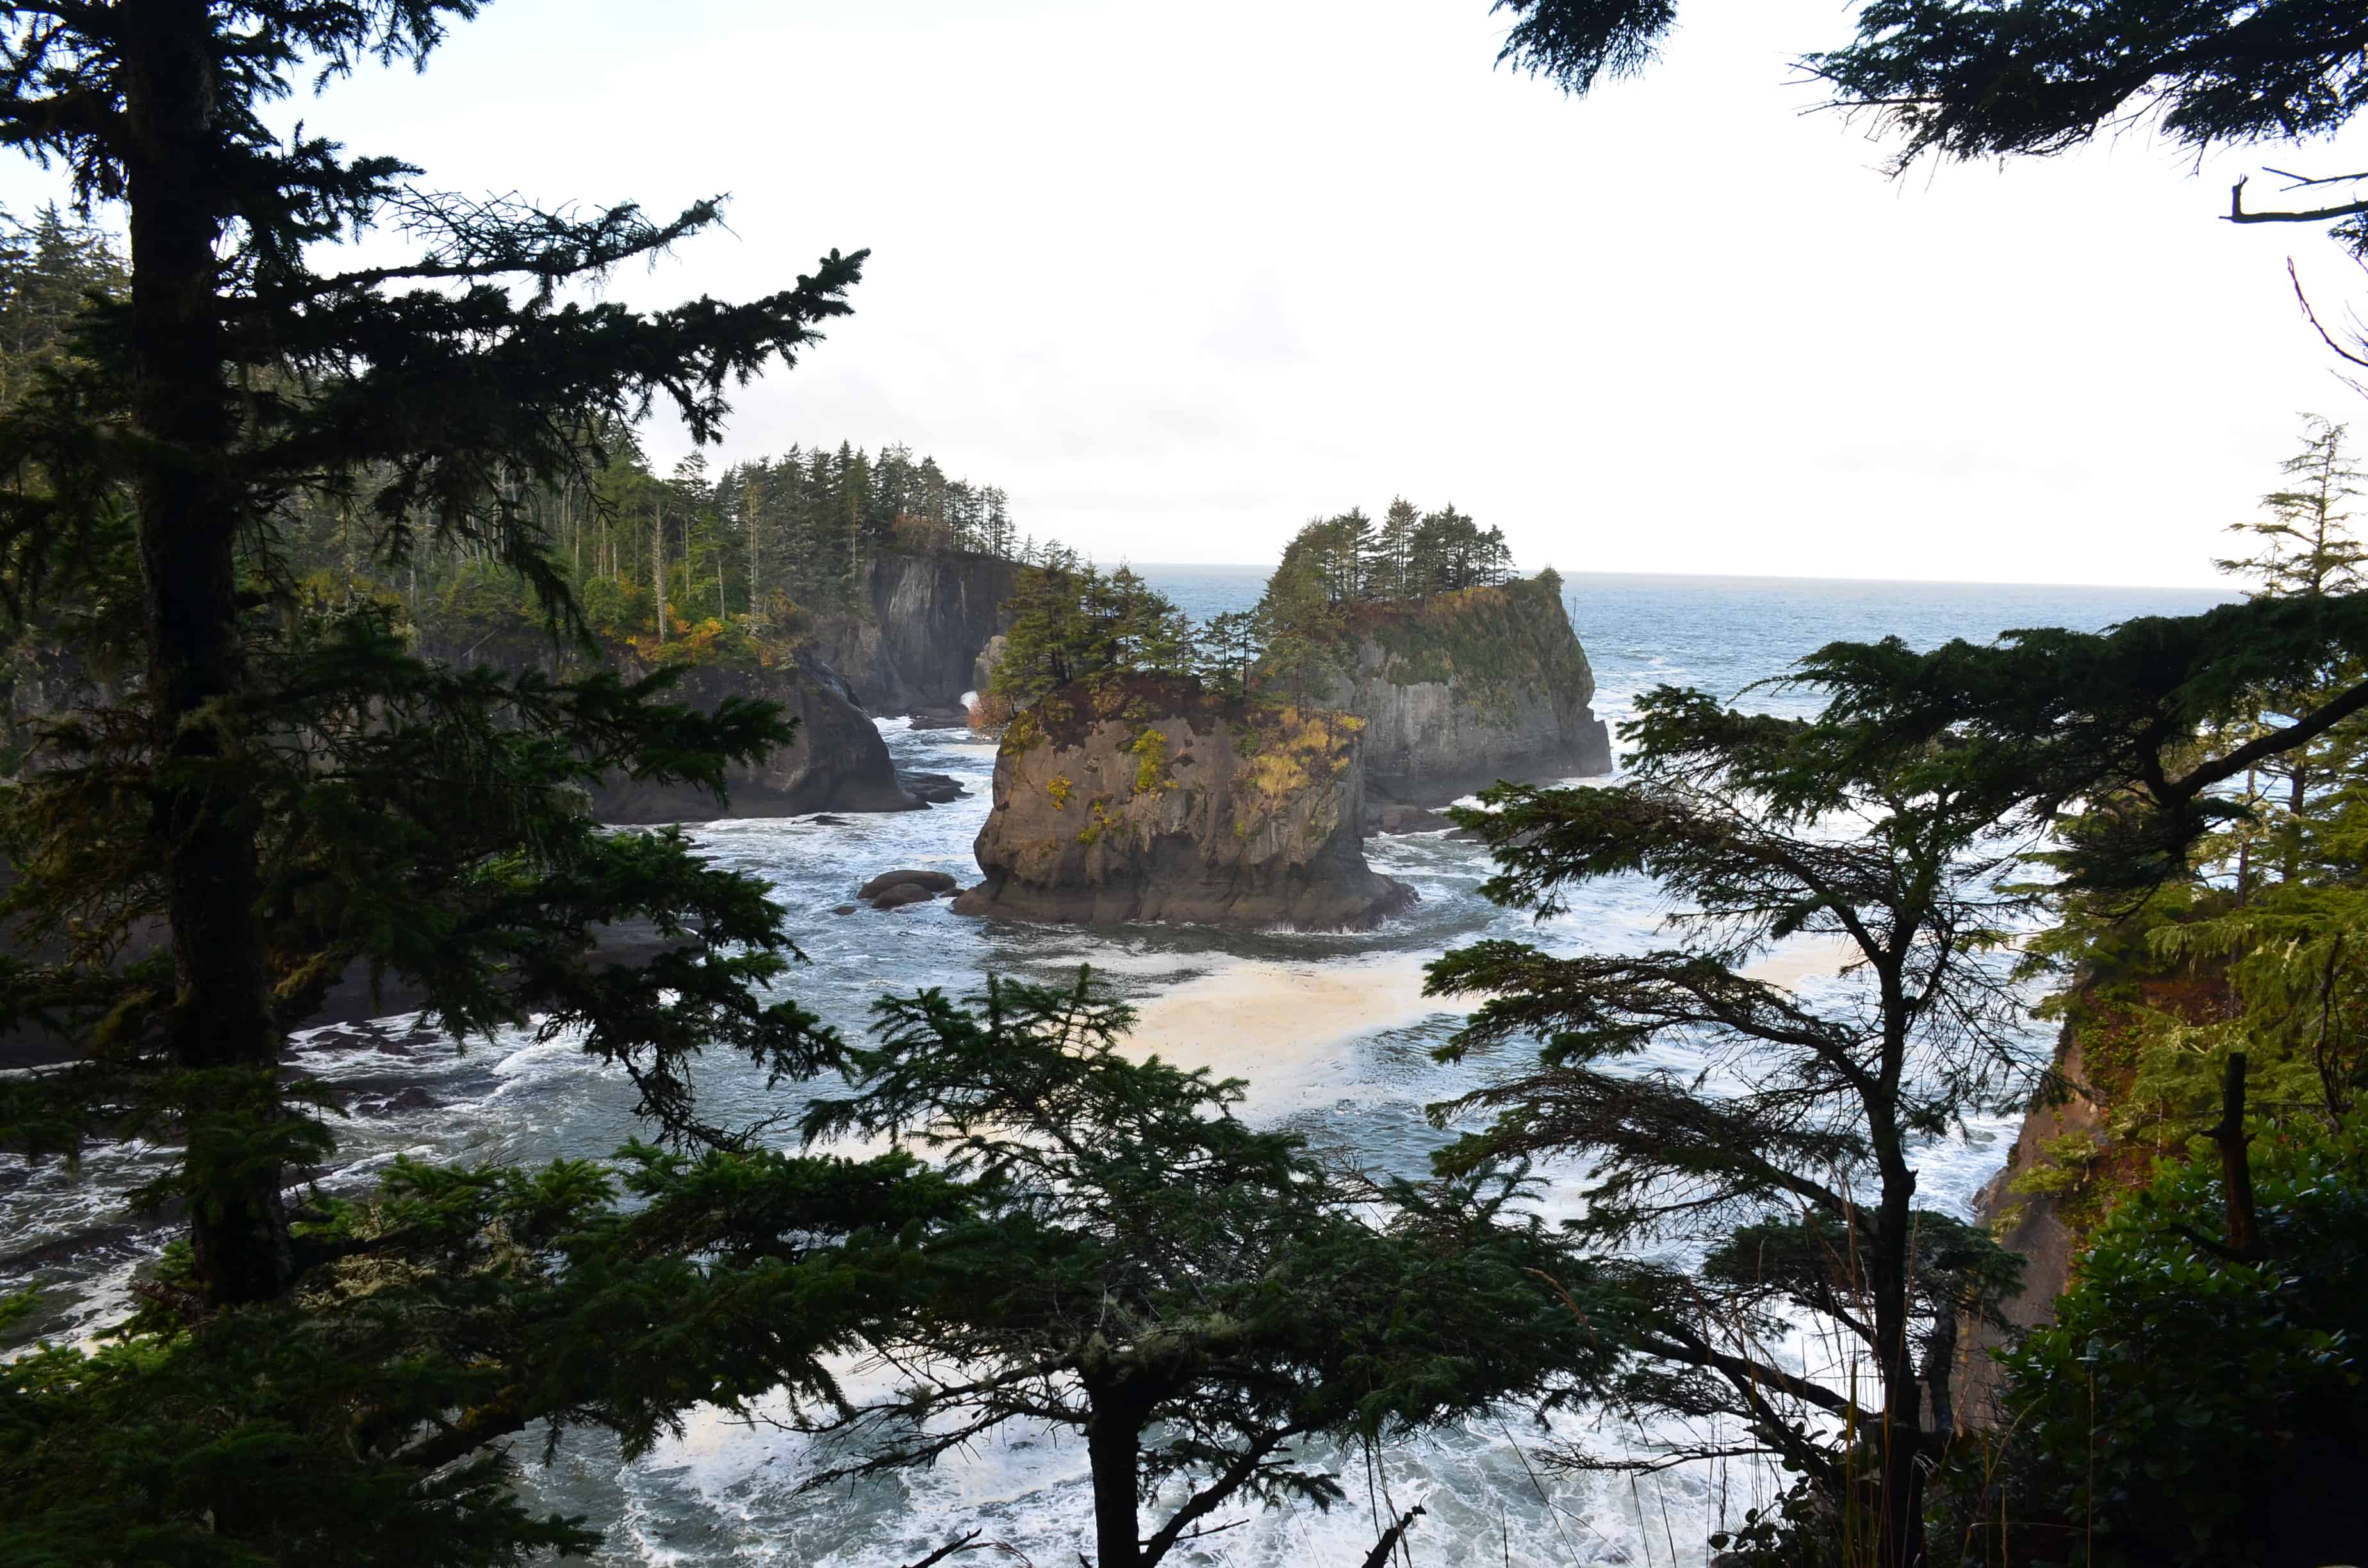 First viewpoint on the Cape Flattery Trail on the Makah Reservation in Washington